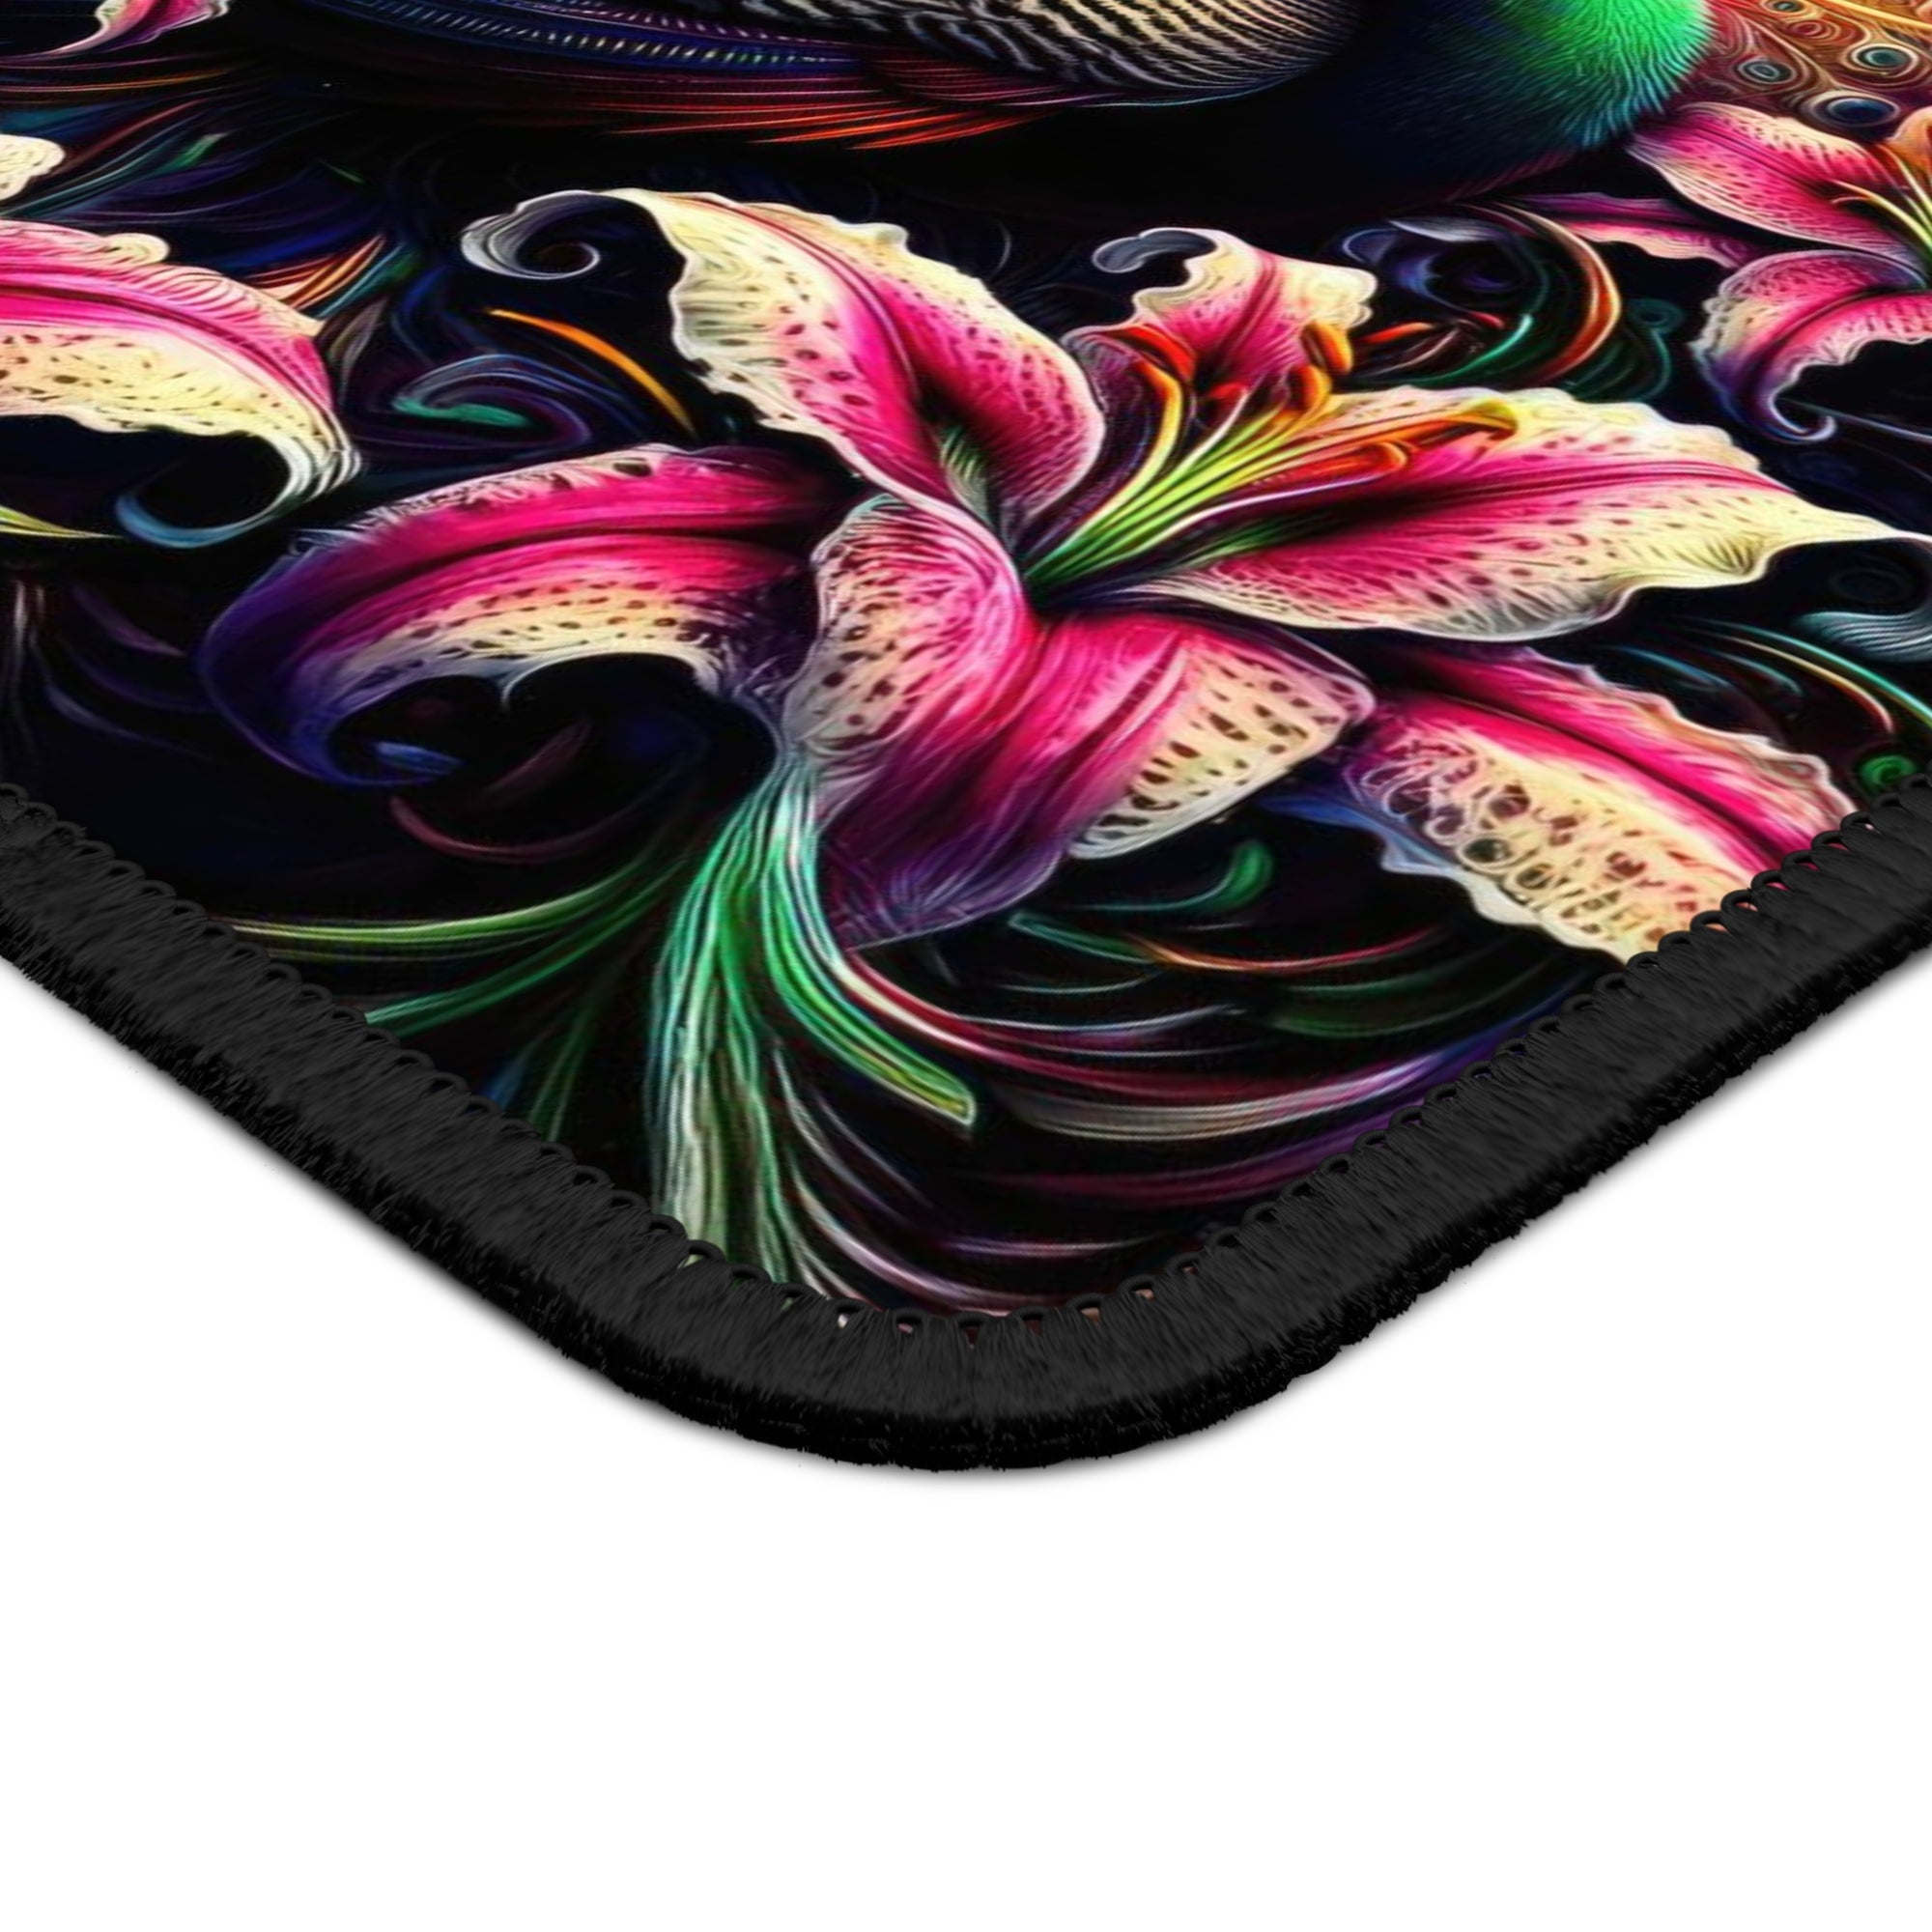 The Luminous Dance of the Peacock Gaming Mouse Pad